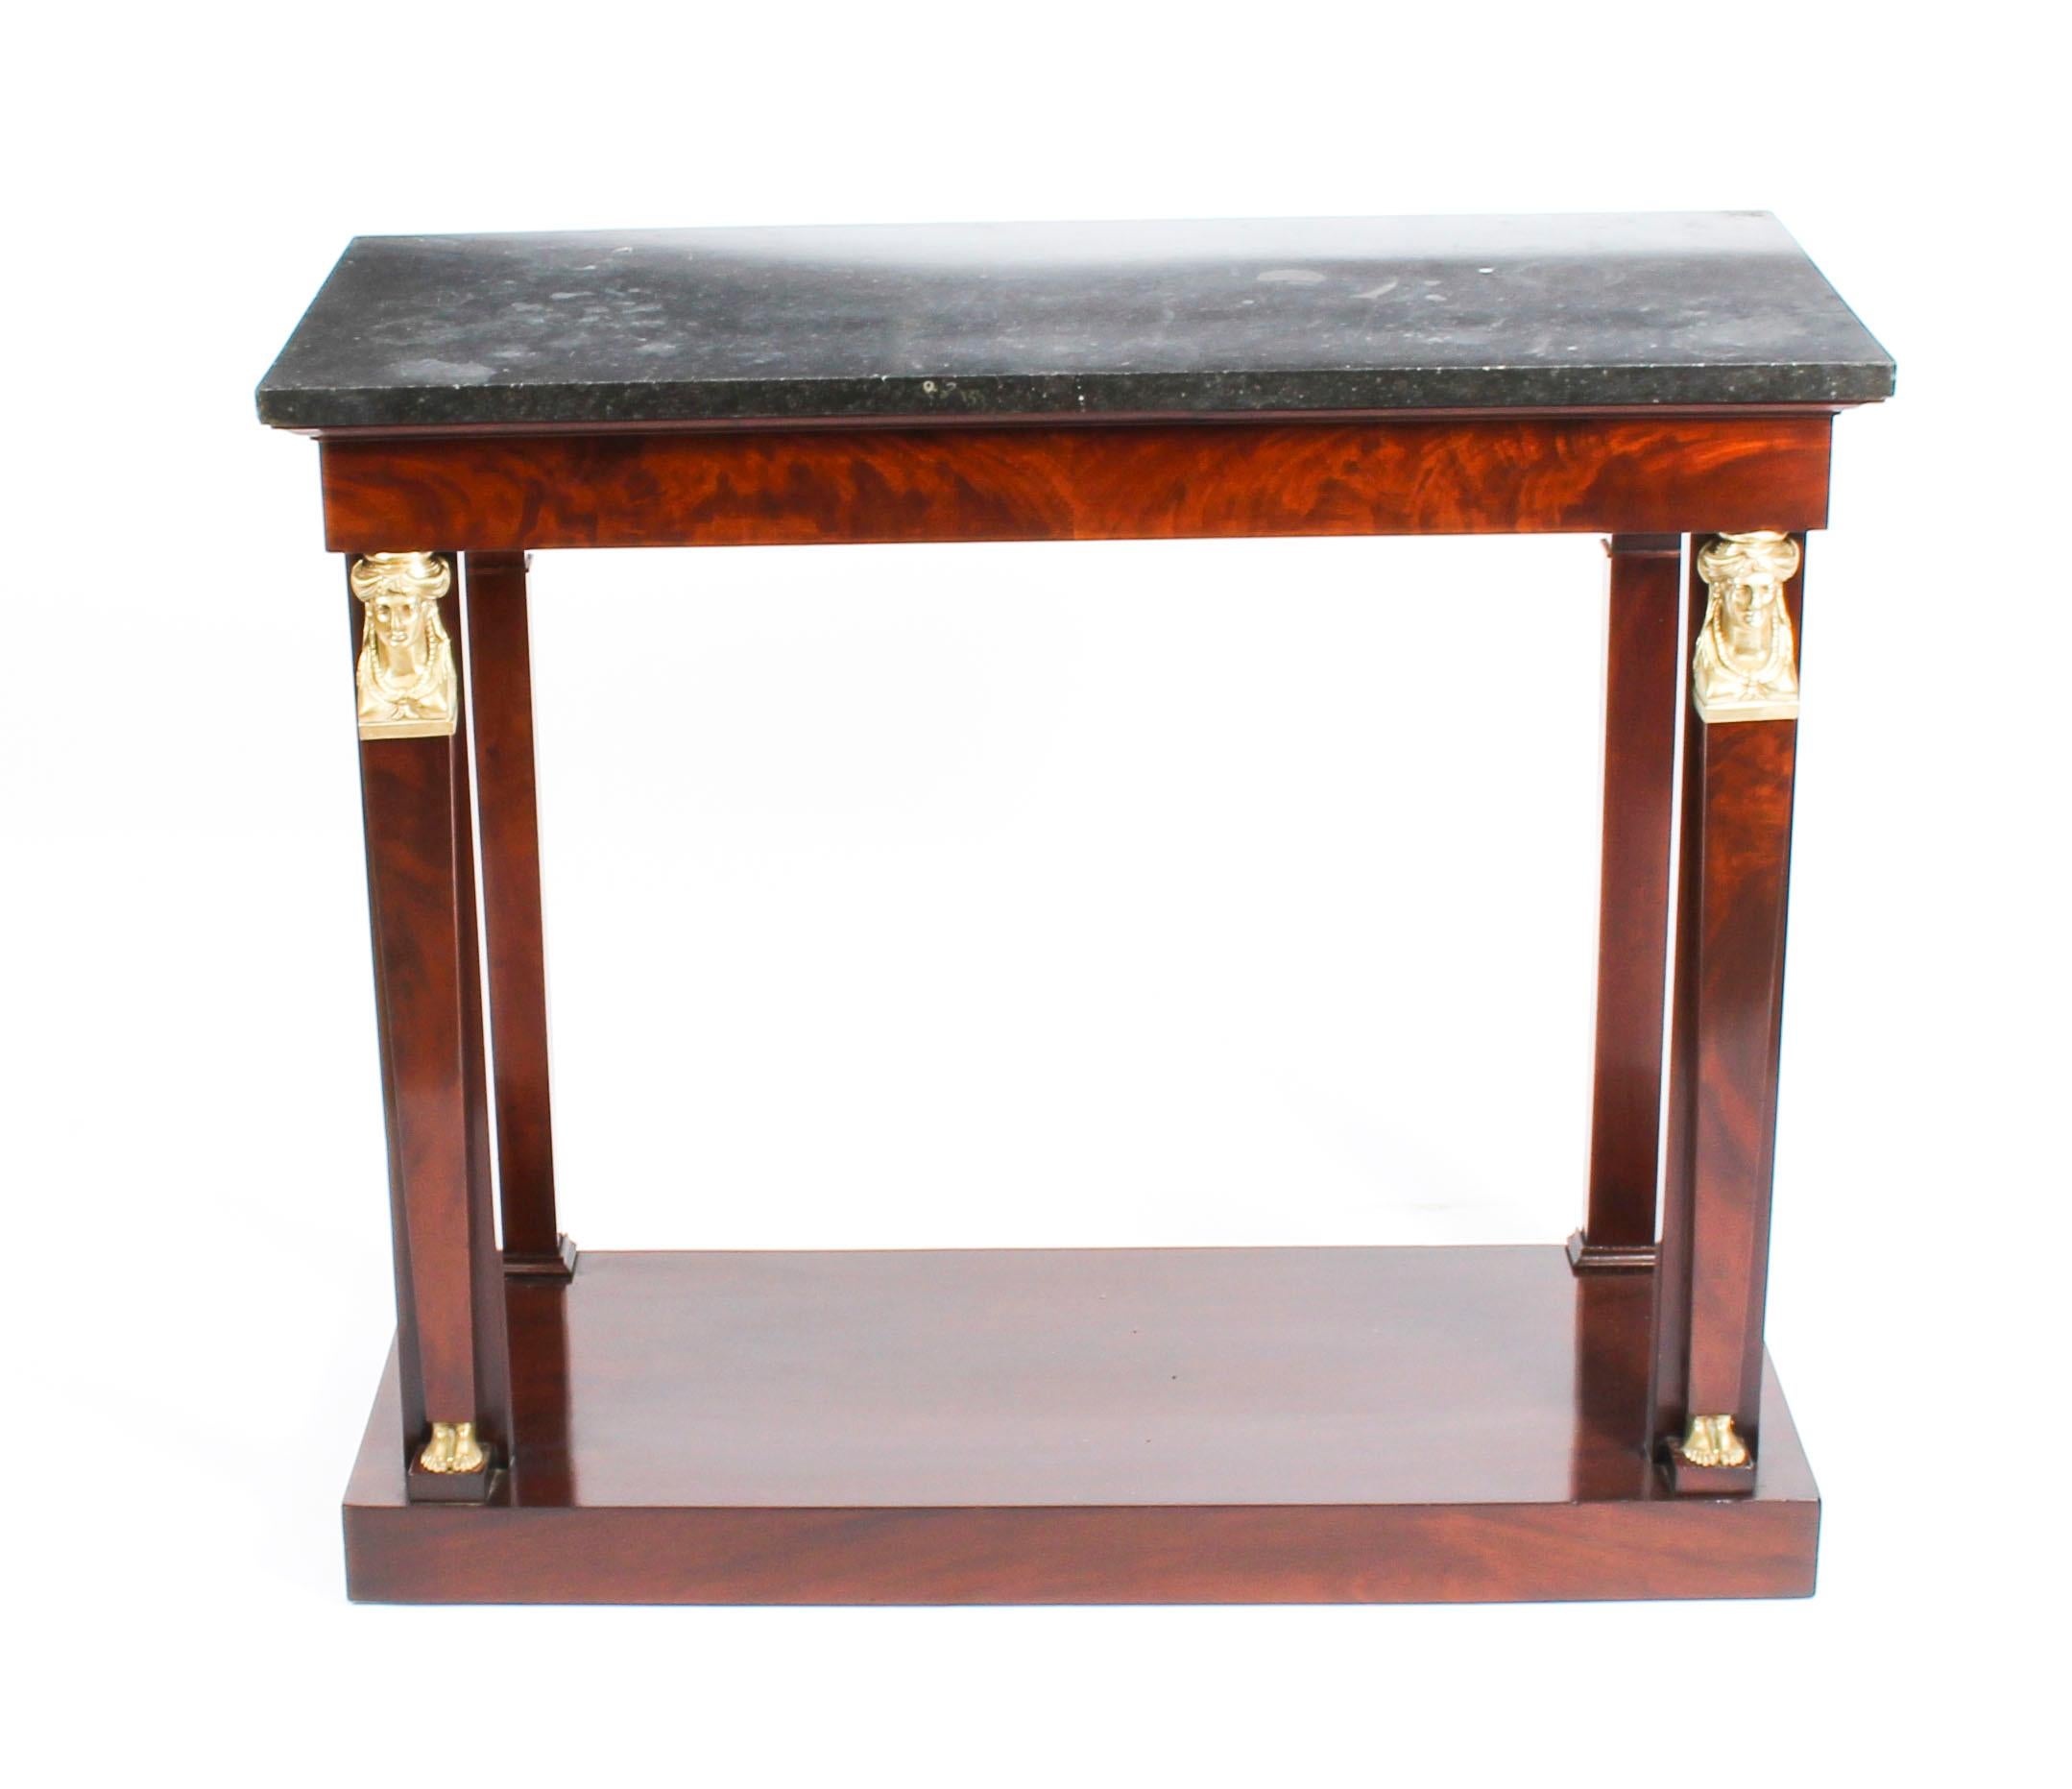 This is an elegant antique French Empire flame mahogany and ormolu mounted console table with a distinctive Belgian fossil marble top, circa 1810 in date.

This magnificent table has beautiful decorative ormolu Egyptian revival neo-classical